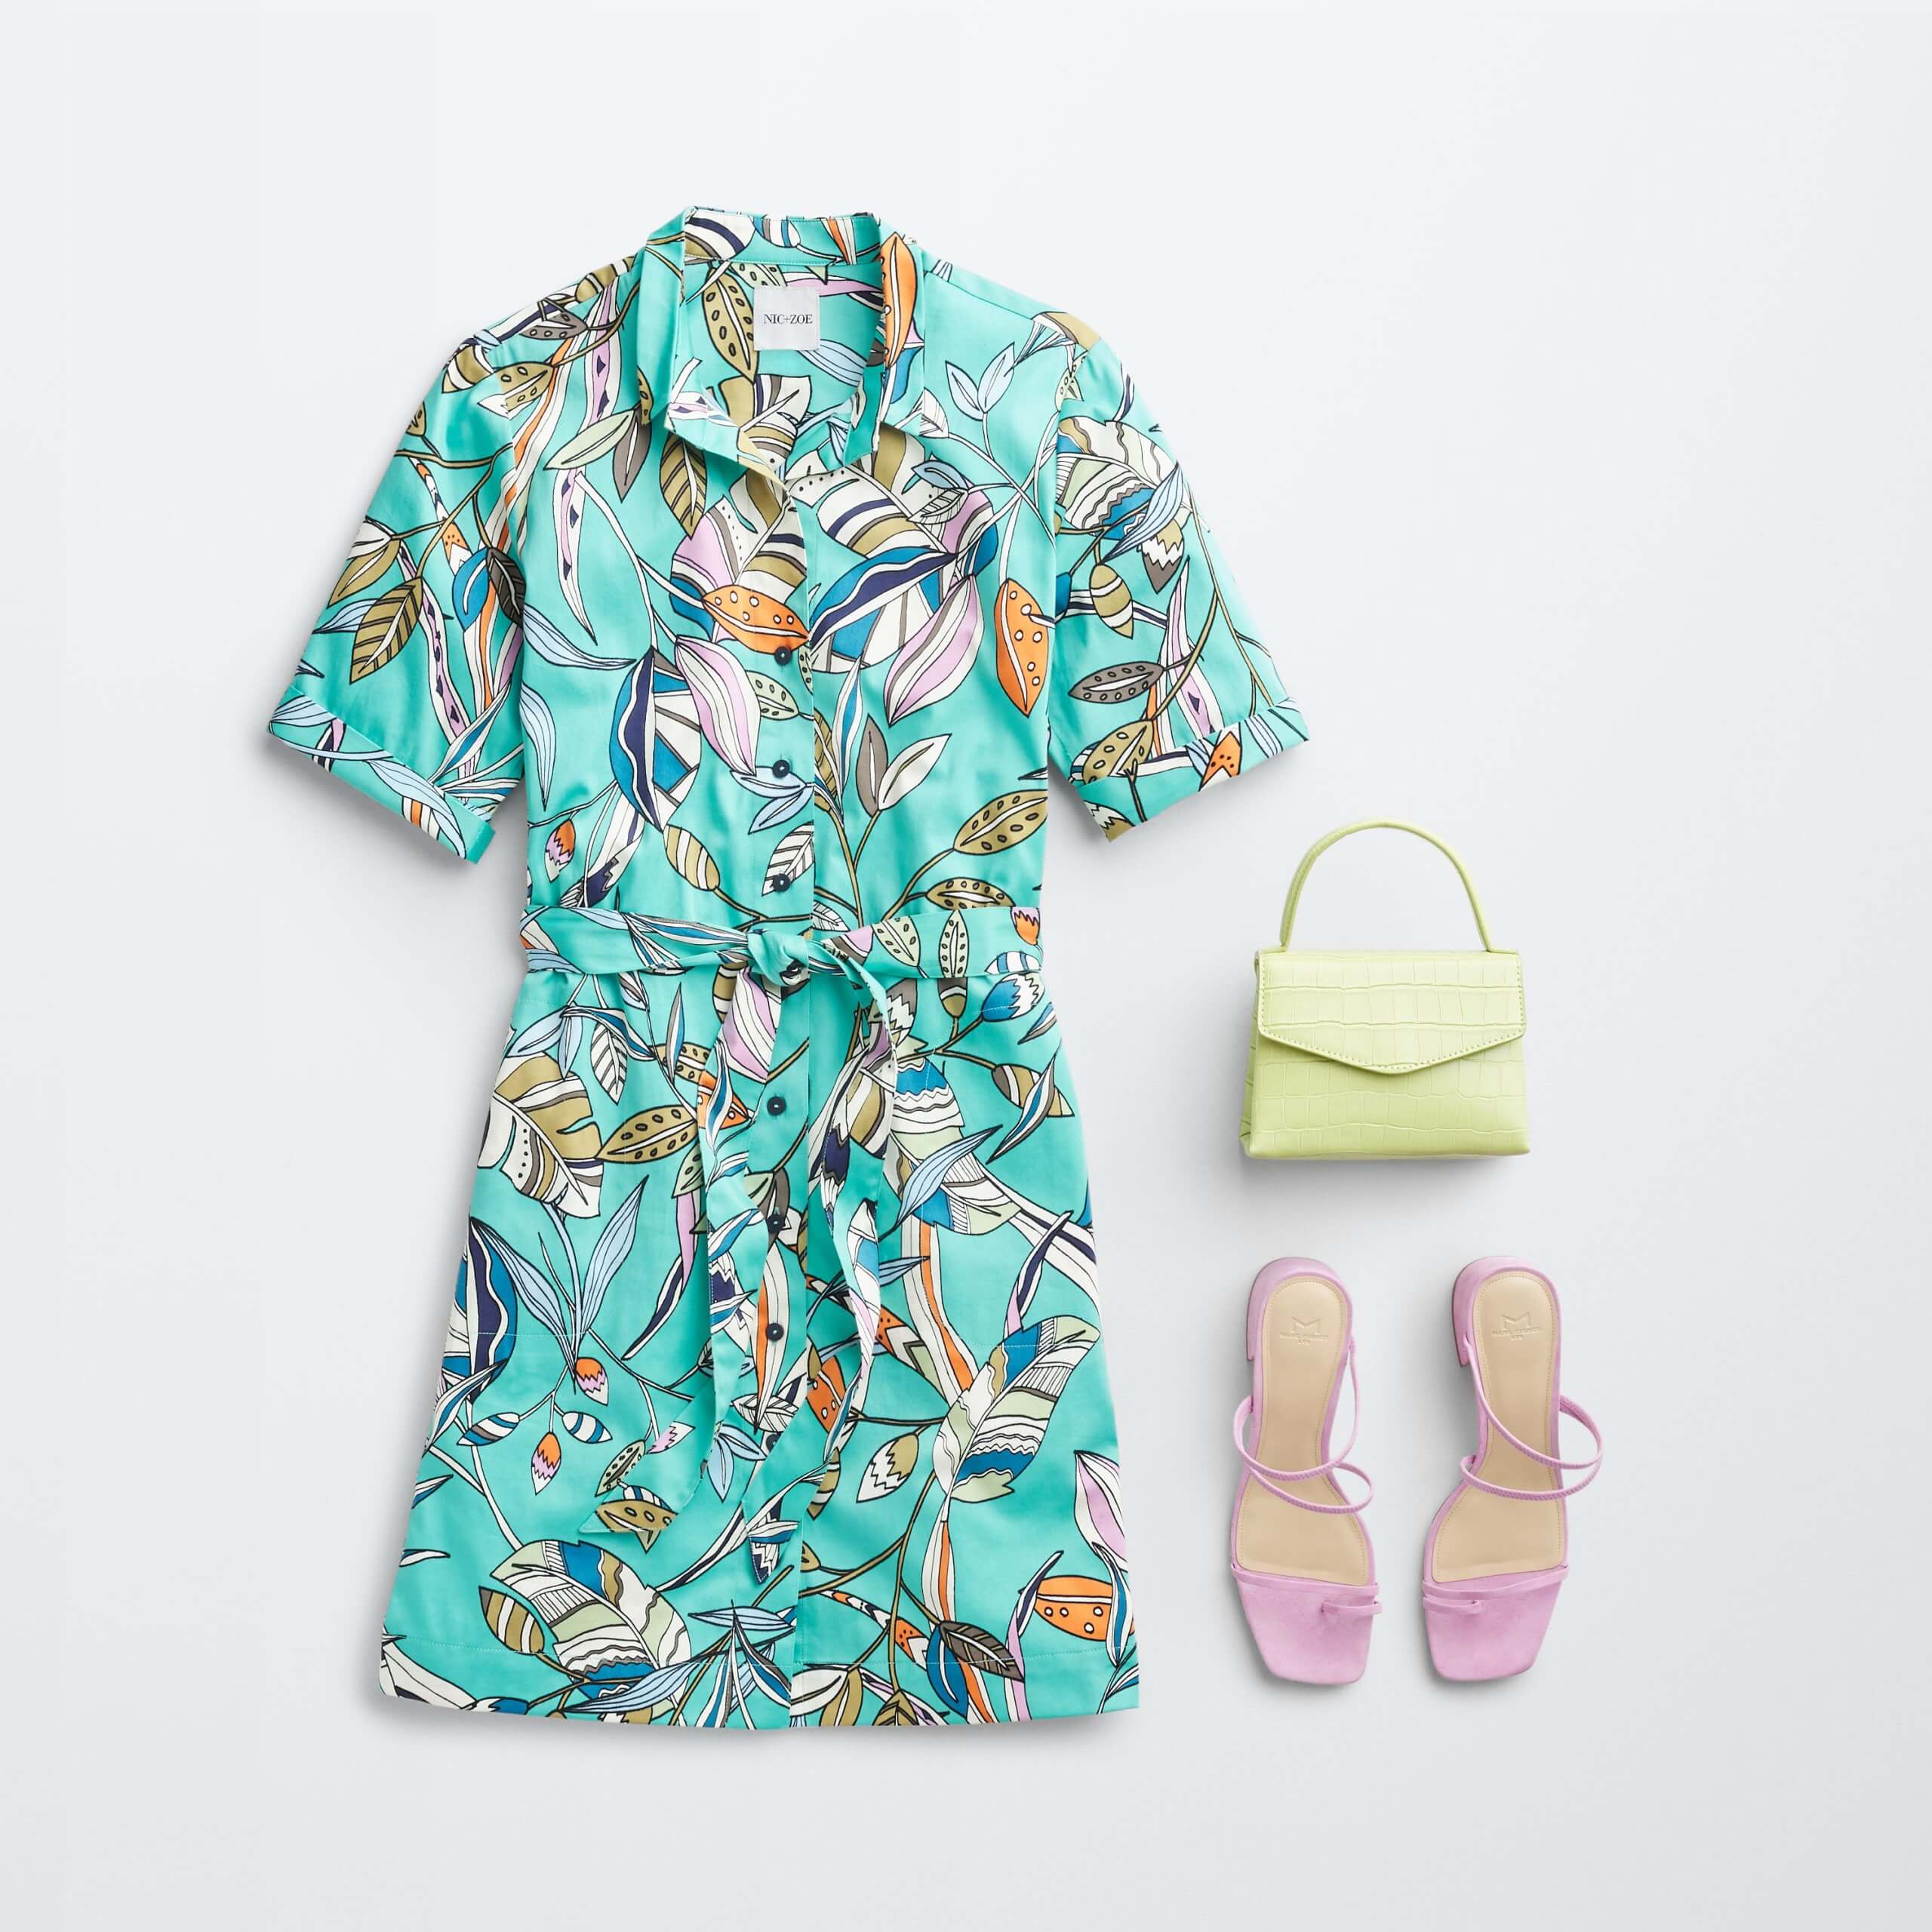 Stitch Fix Women’s outfit laydown featuring a teal tropical print dress next to lime-green crossbody bag and pink heeled sandals.